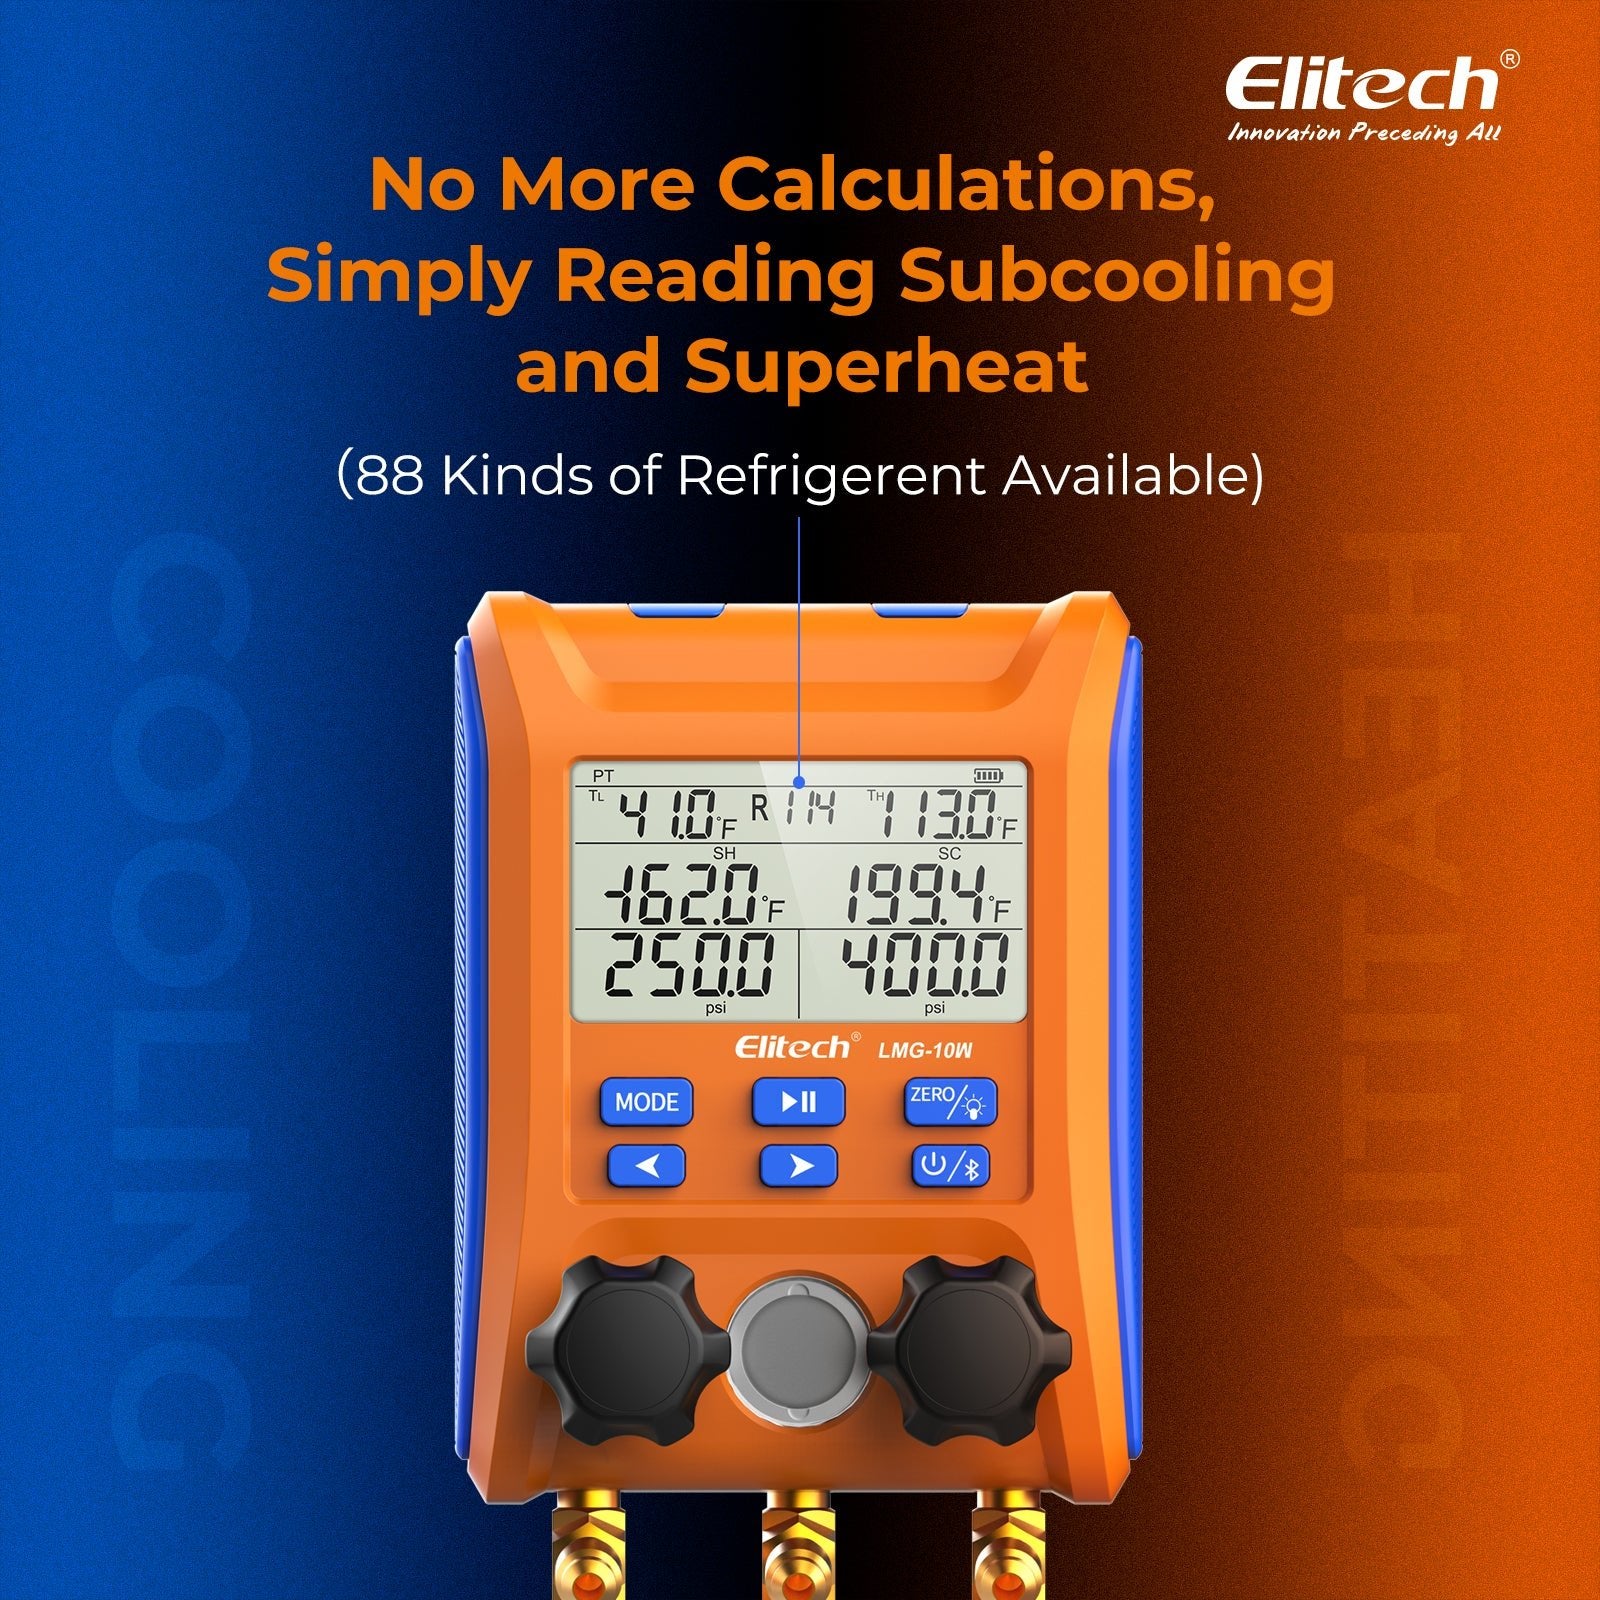 Elitech Digital Manifold Gauge 2-way Valve AC Gauges App Control with Thermometer Clamps for HVAC Systems, LMG-10W - Elitech Technology, Inc.